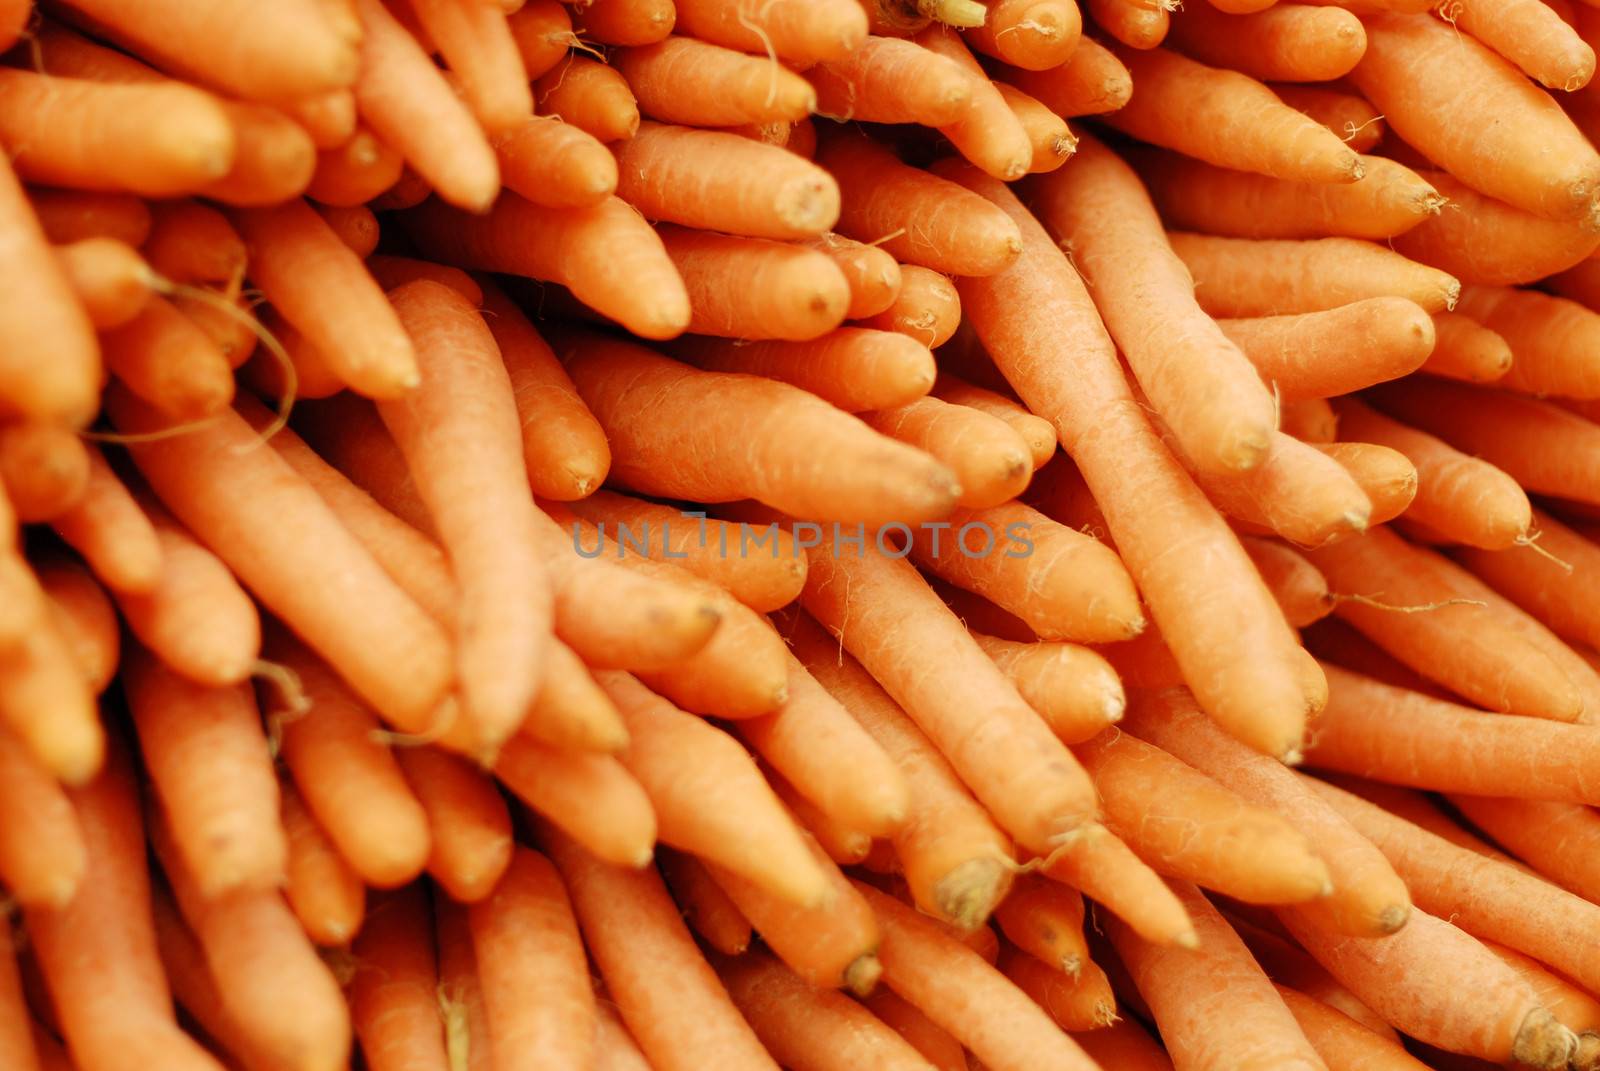 Fresh carrots piled high on a market stall